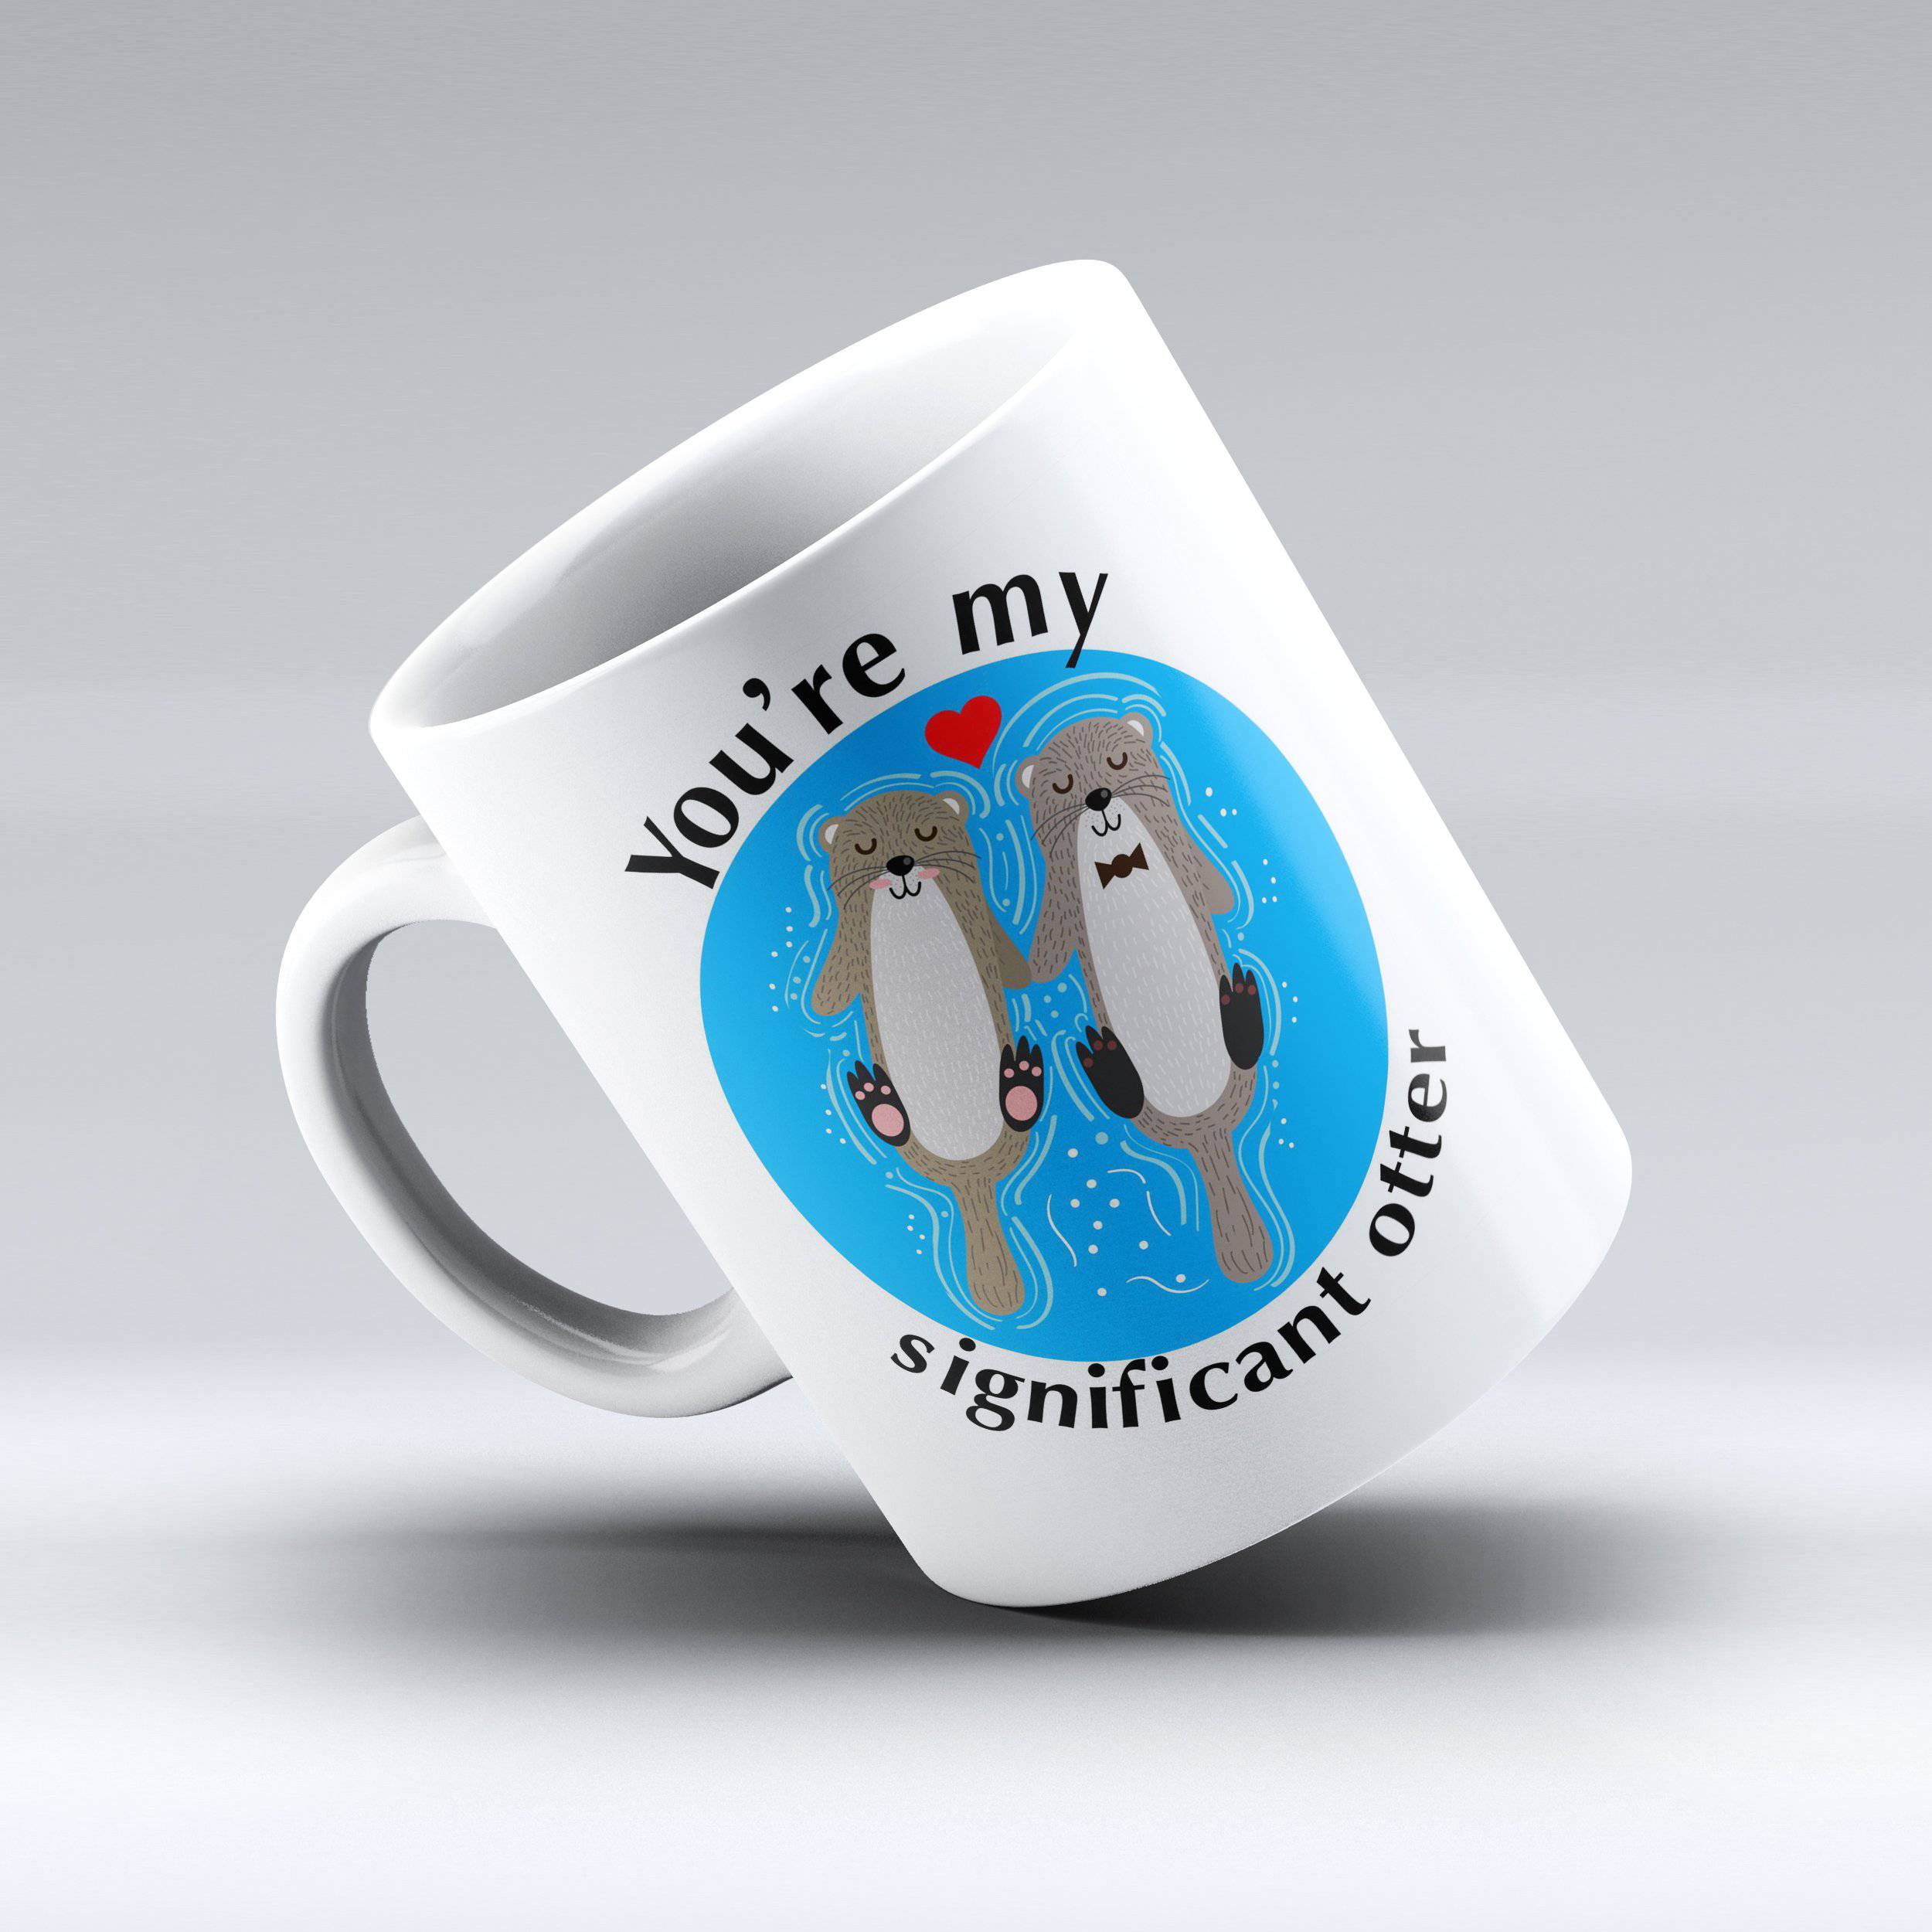 You're My Significant Otter Coffee Mug - Cute Otter Coffee Mug - 150TEES.COM - 150 TEES GIFTS & MORE